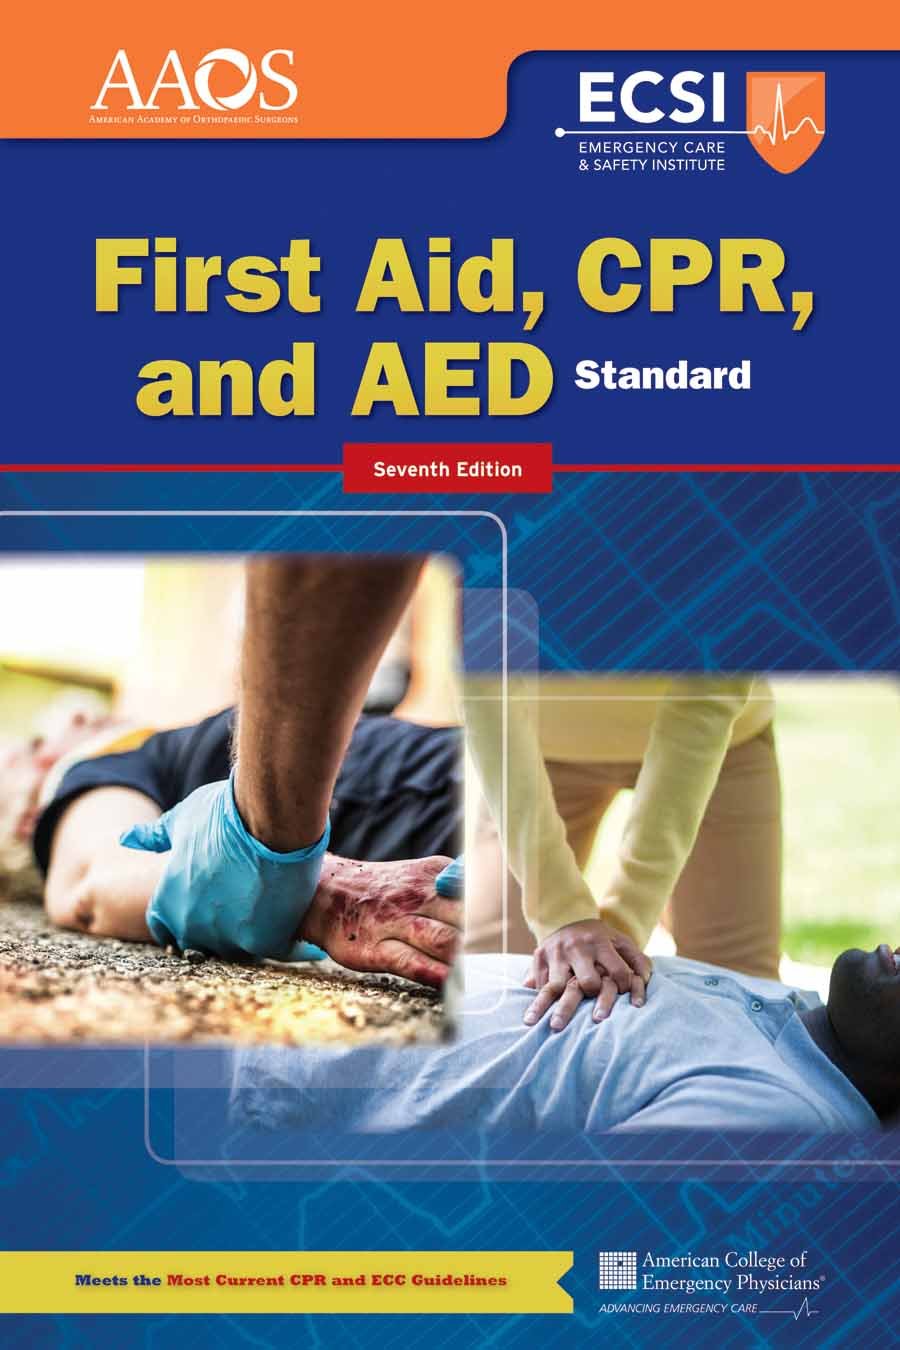 Standard First Aid, CPR, and AED, Seventh Edition